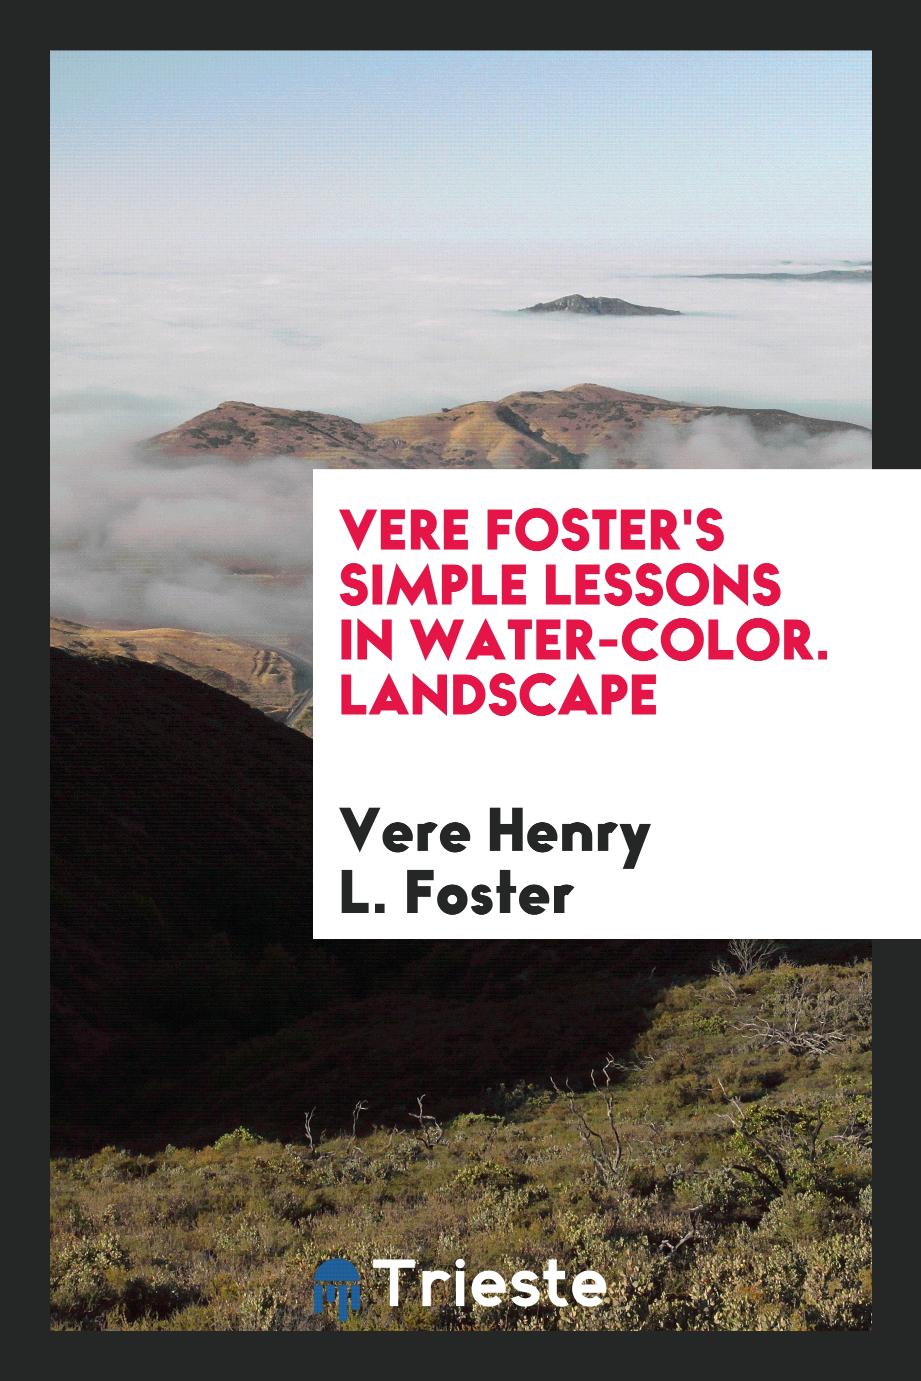 Vere Foster's Simple lessons in water-color. Landscape